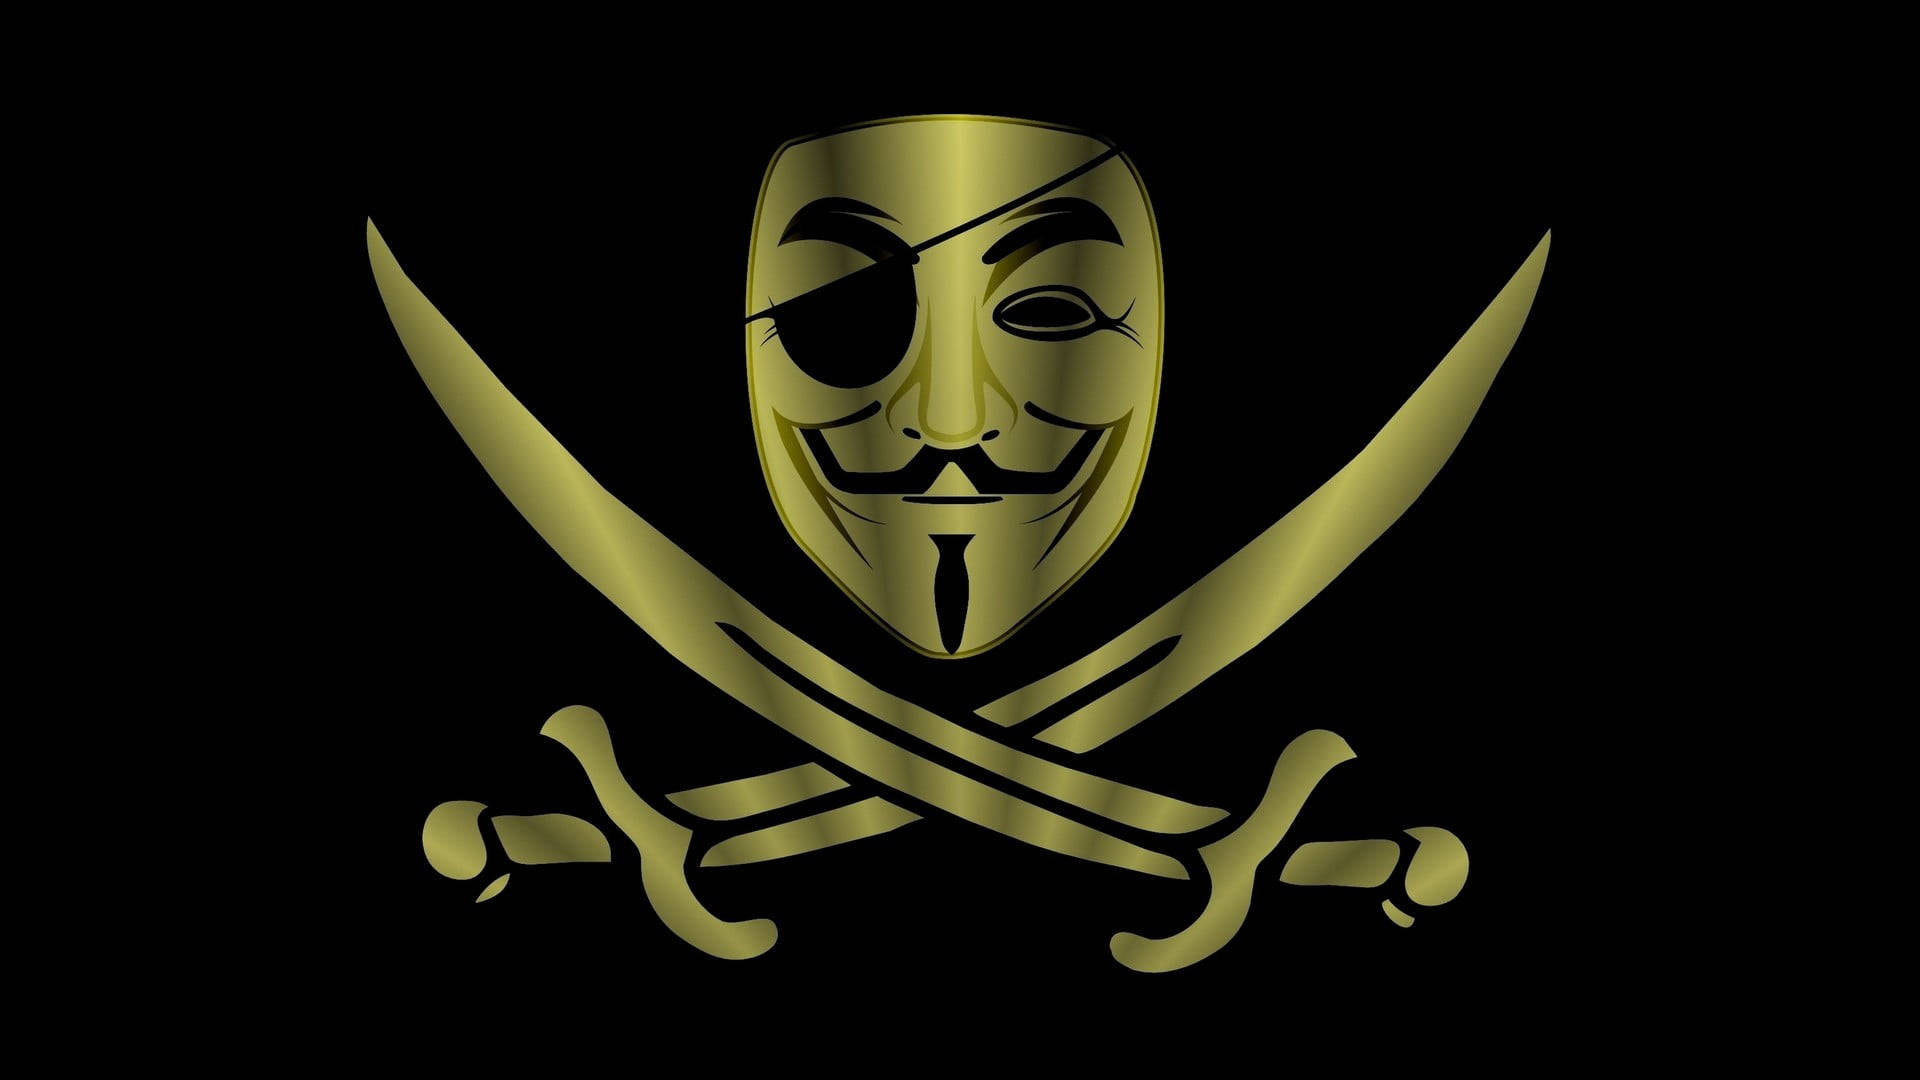 Hacker Logo Pirate Fawkes Background